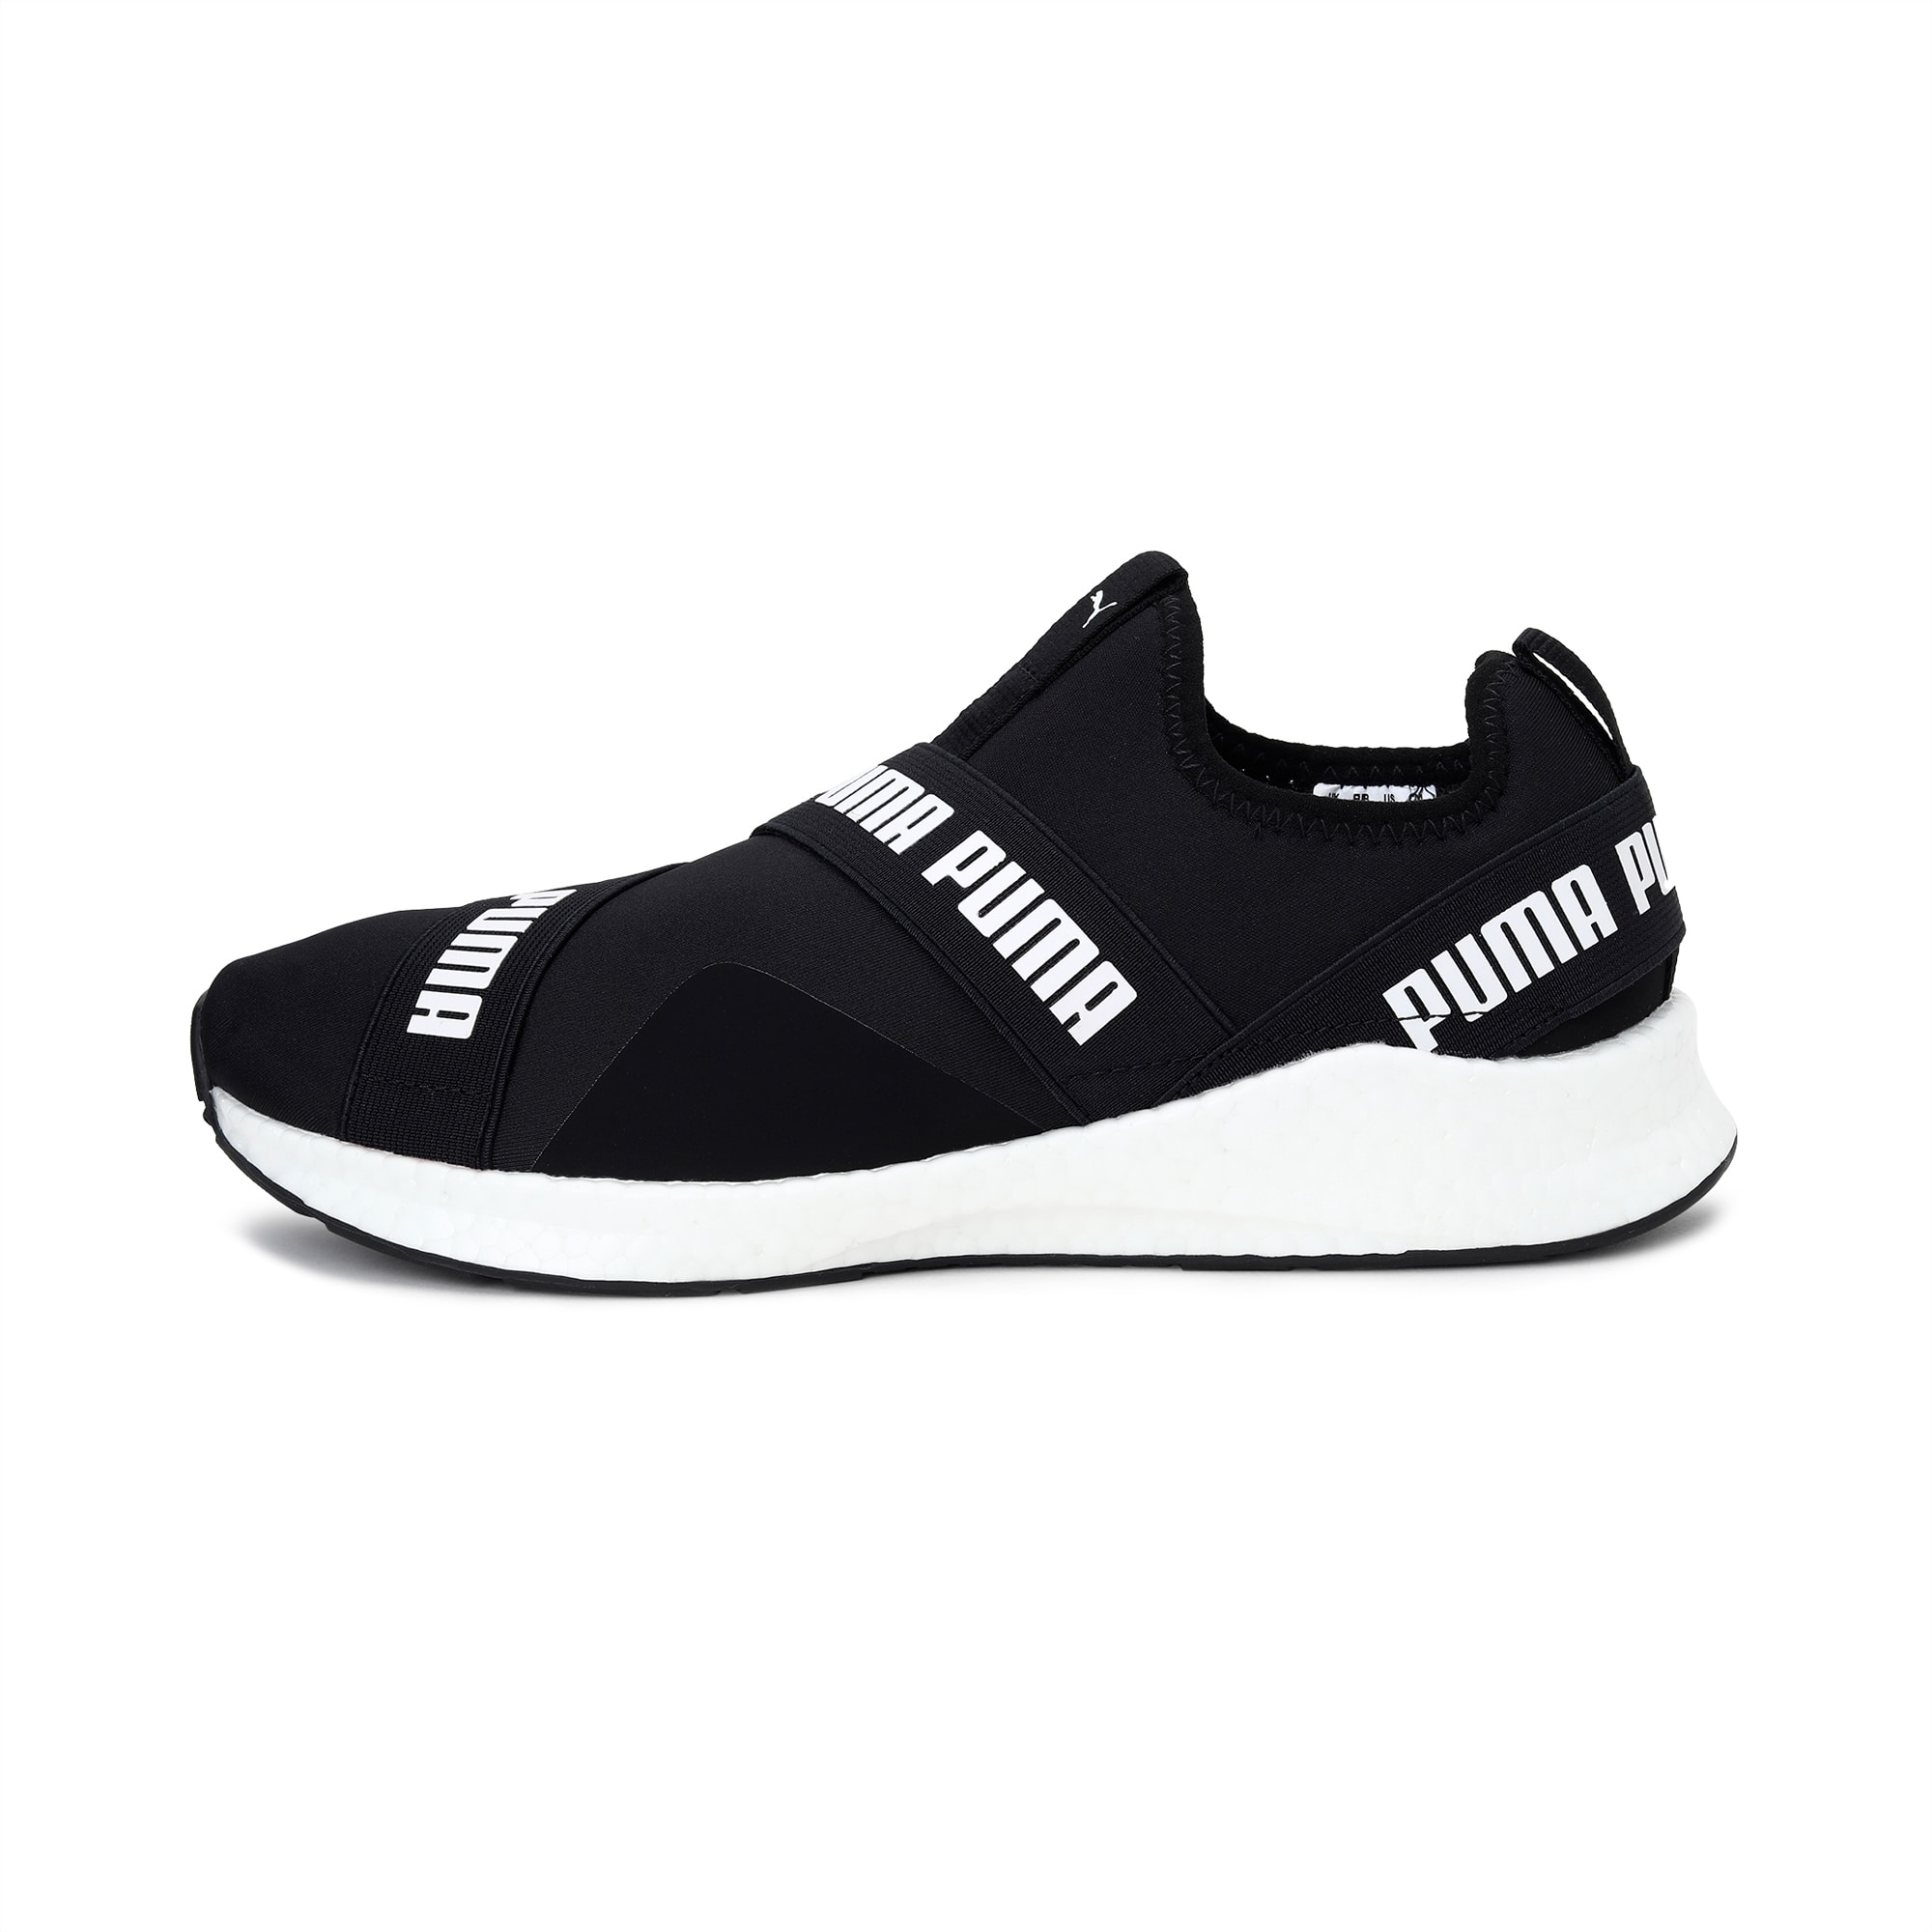 are puma shoes comfortable